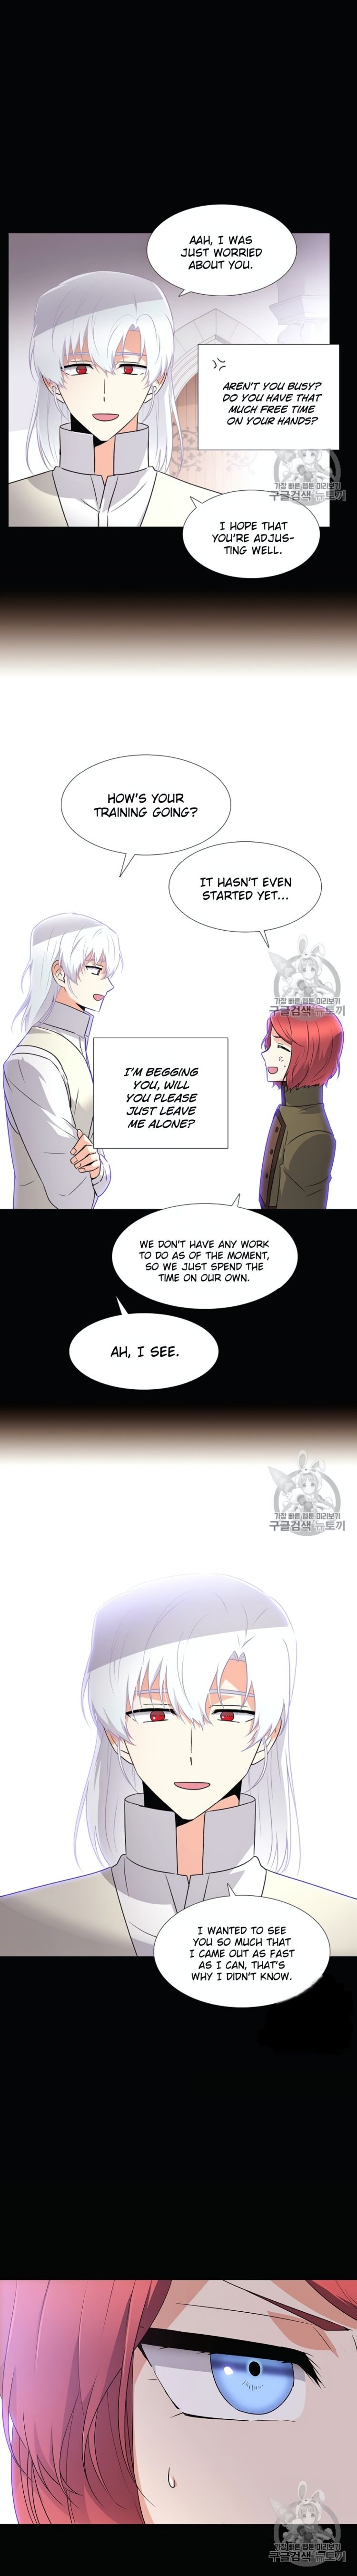 The Villain Discovered My Identity Chapter 5 - Page 4